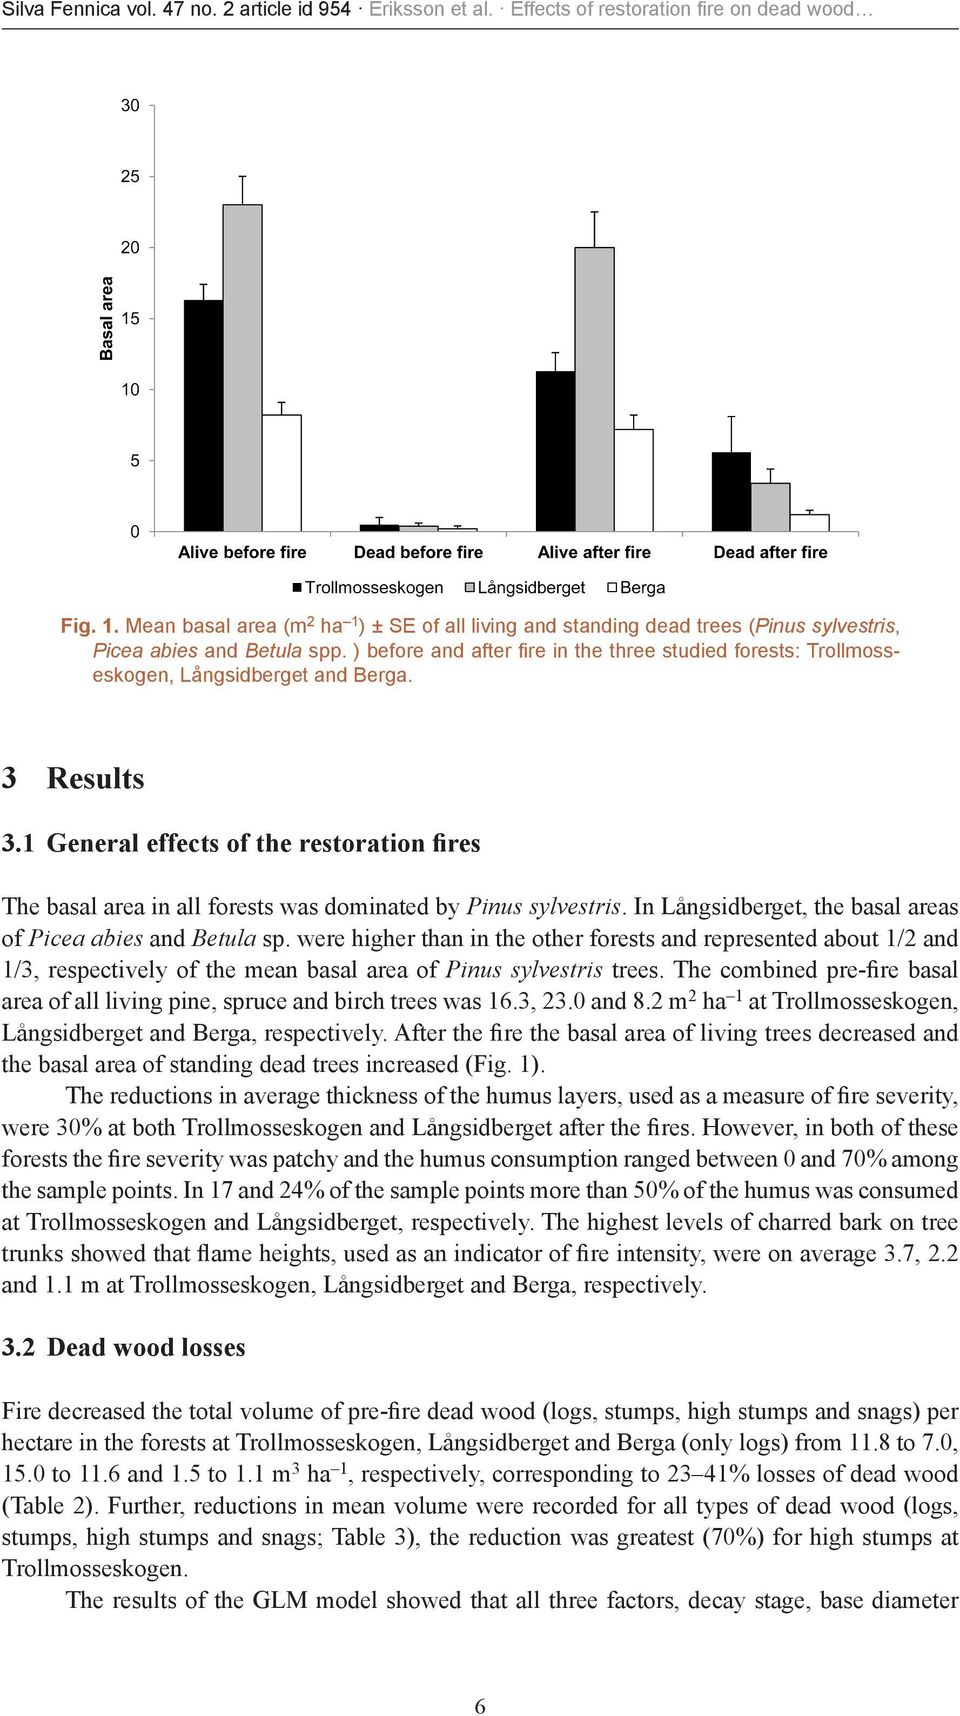 1 General effects of the restoration fires The basal area in all forests was dominated by Pinus sylvestris. In Långsidberget, the basal areas of Picea abies and Betula sp.